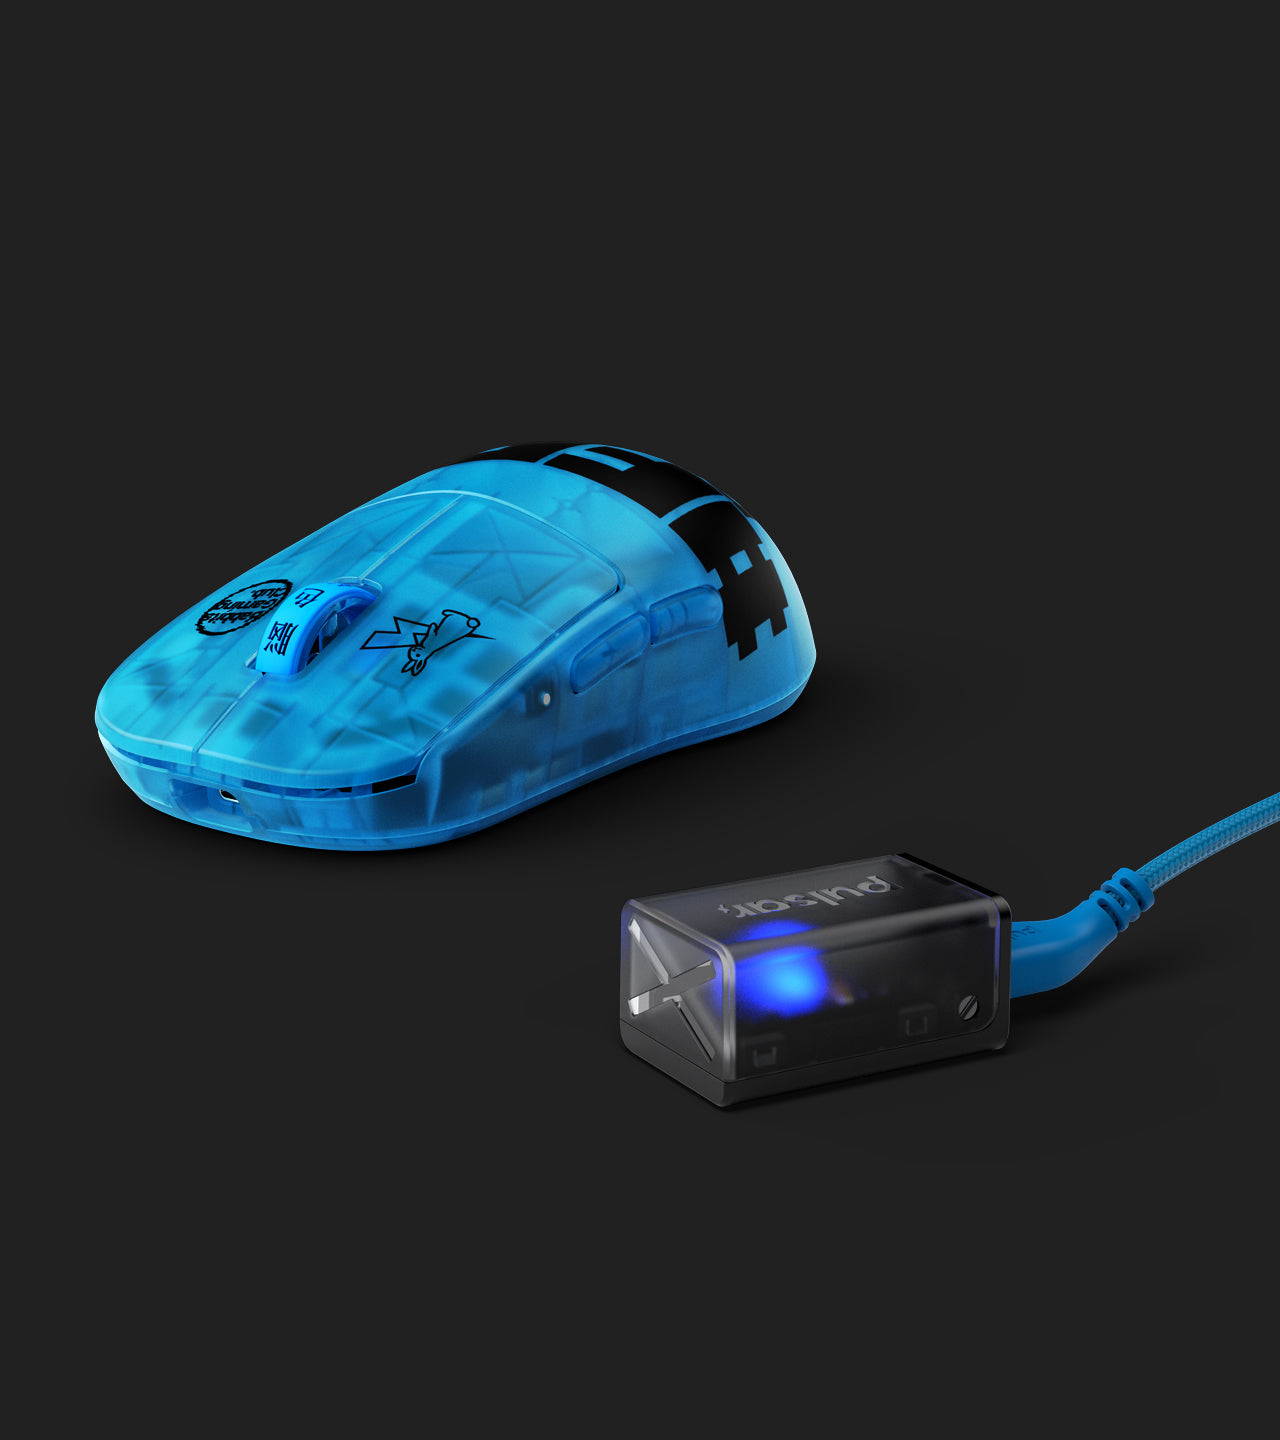 FR2 Edition] X2H Gaming Mouse – Pulsar Gaming Gears